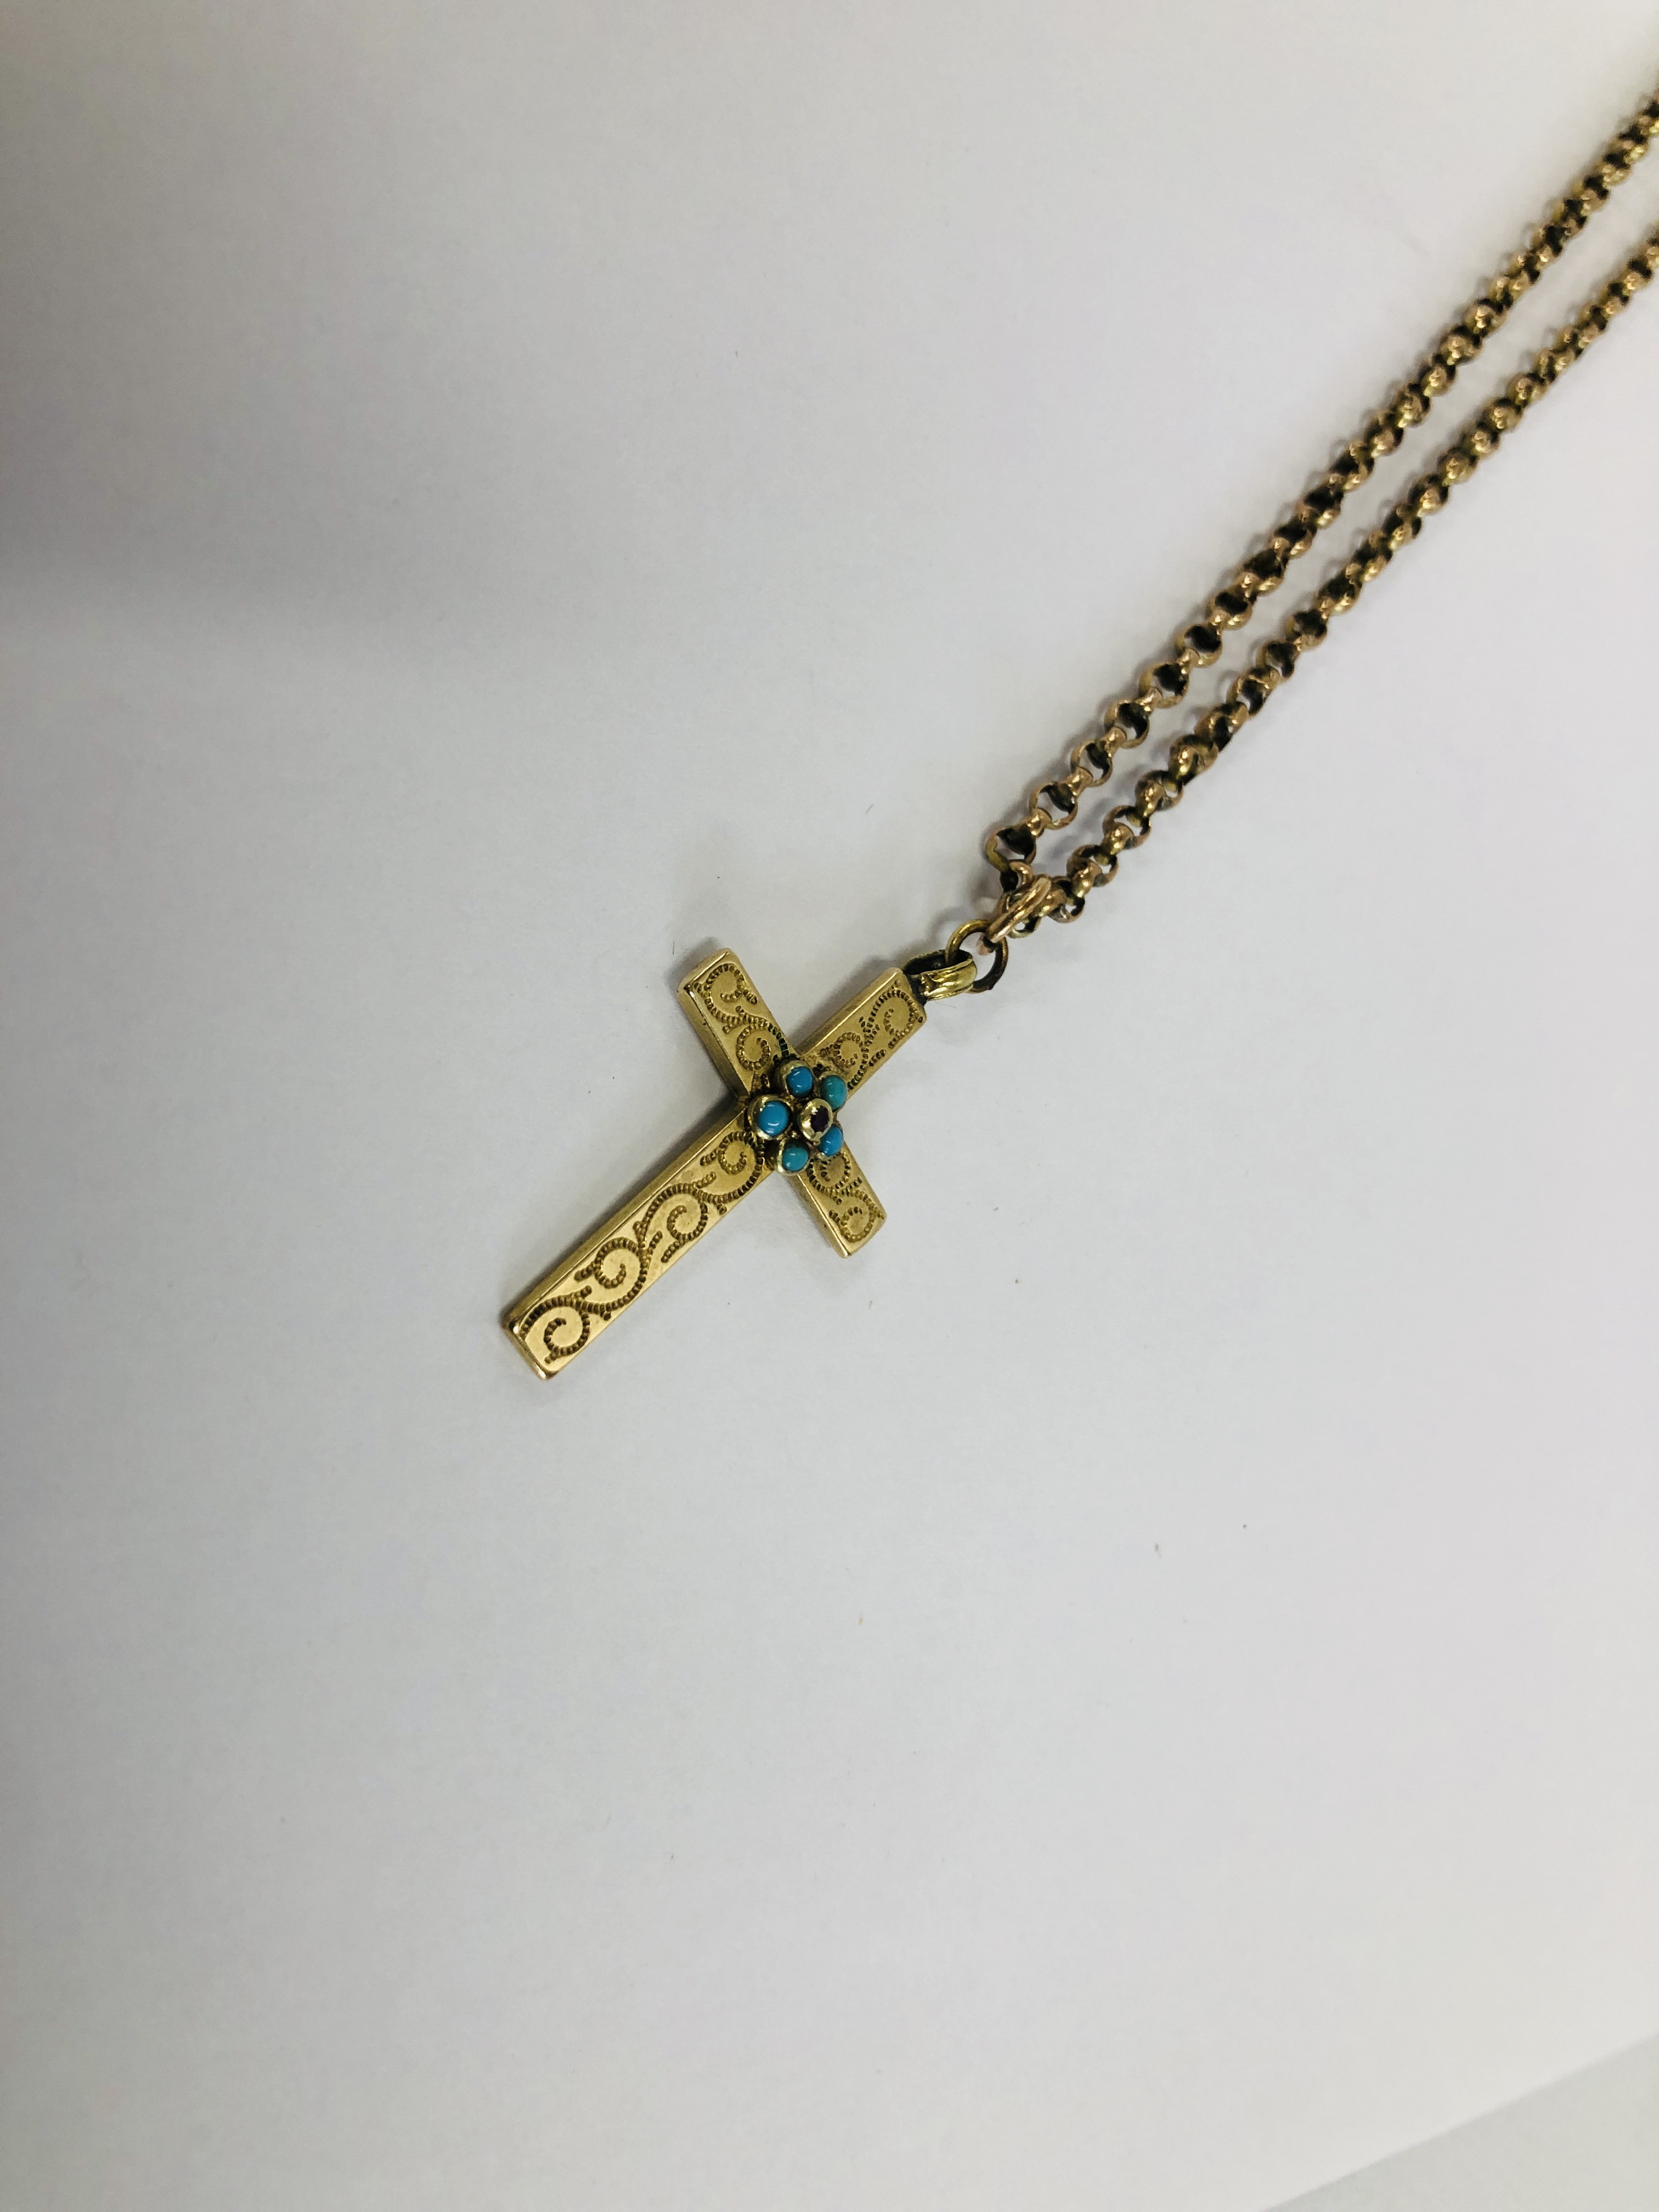 A YELLOW METAL CROSS PENDANT NECKLACE SET WITH TURQUOISE (NO VISIBLE HALLMARK). - Image 2 of 10